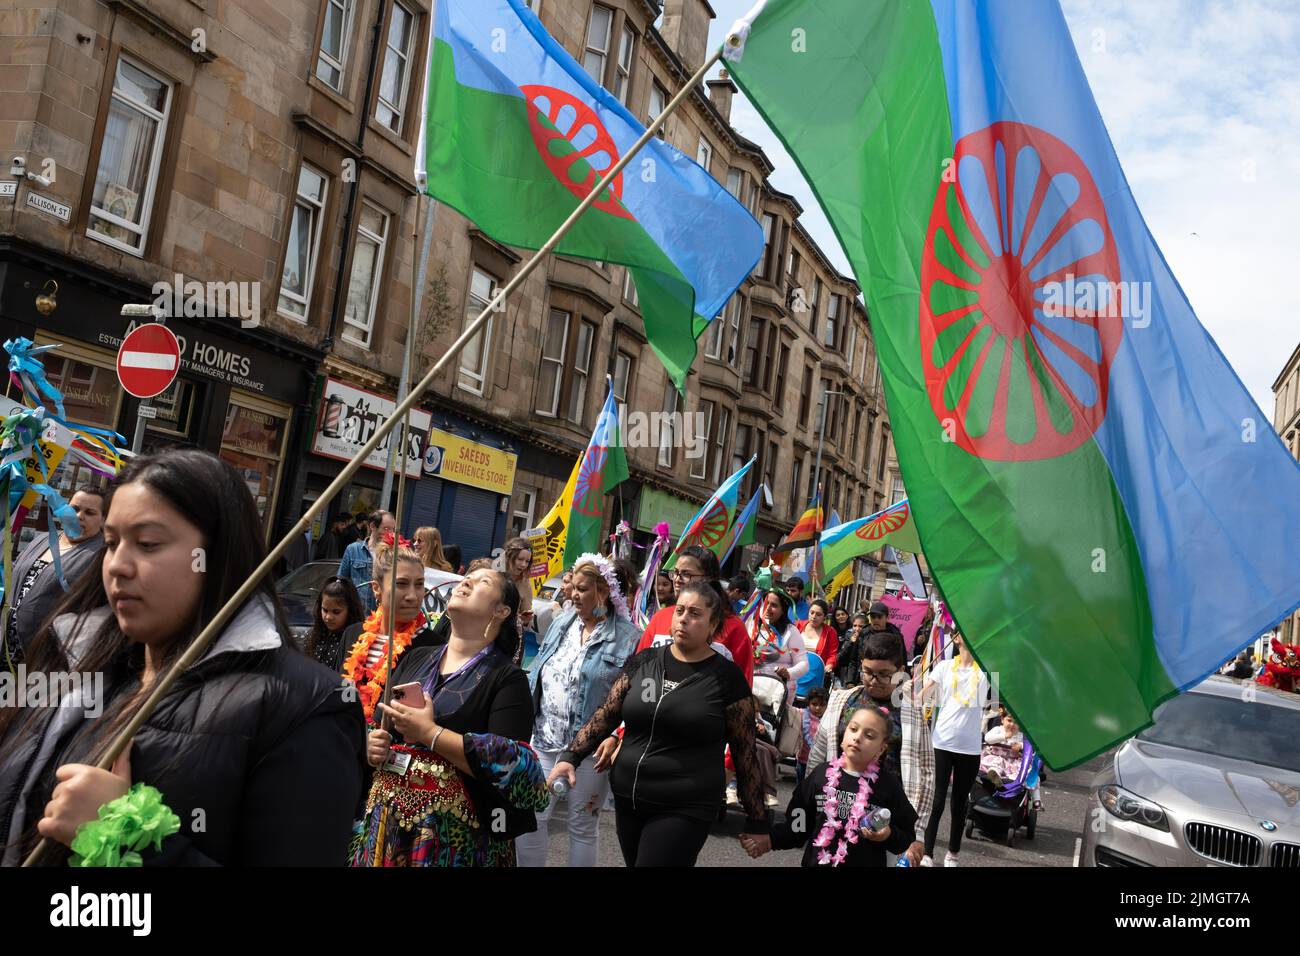 Glasgow, UK, 6th Aug 2022. Roma parade, with the international flag of the Roma, at the Govanhill International Festival and Carnival parade, in Govanhill, Glasgow, Scotland, 6 August 2022. Photo credit: Jeremy Sutton-Hibbert/ Alamy Live News. Stock Photo